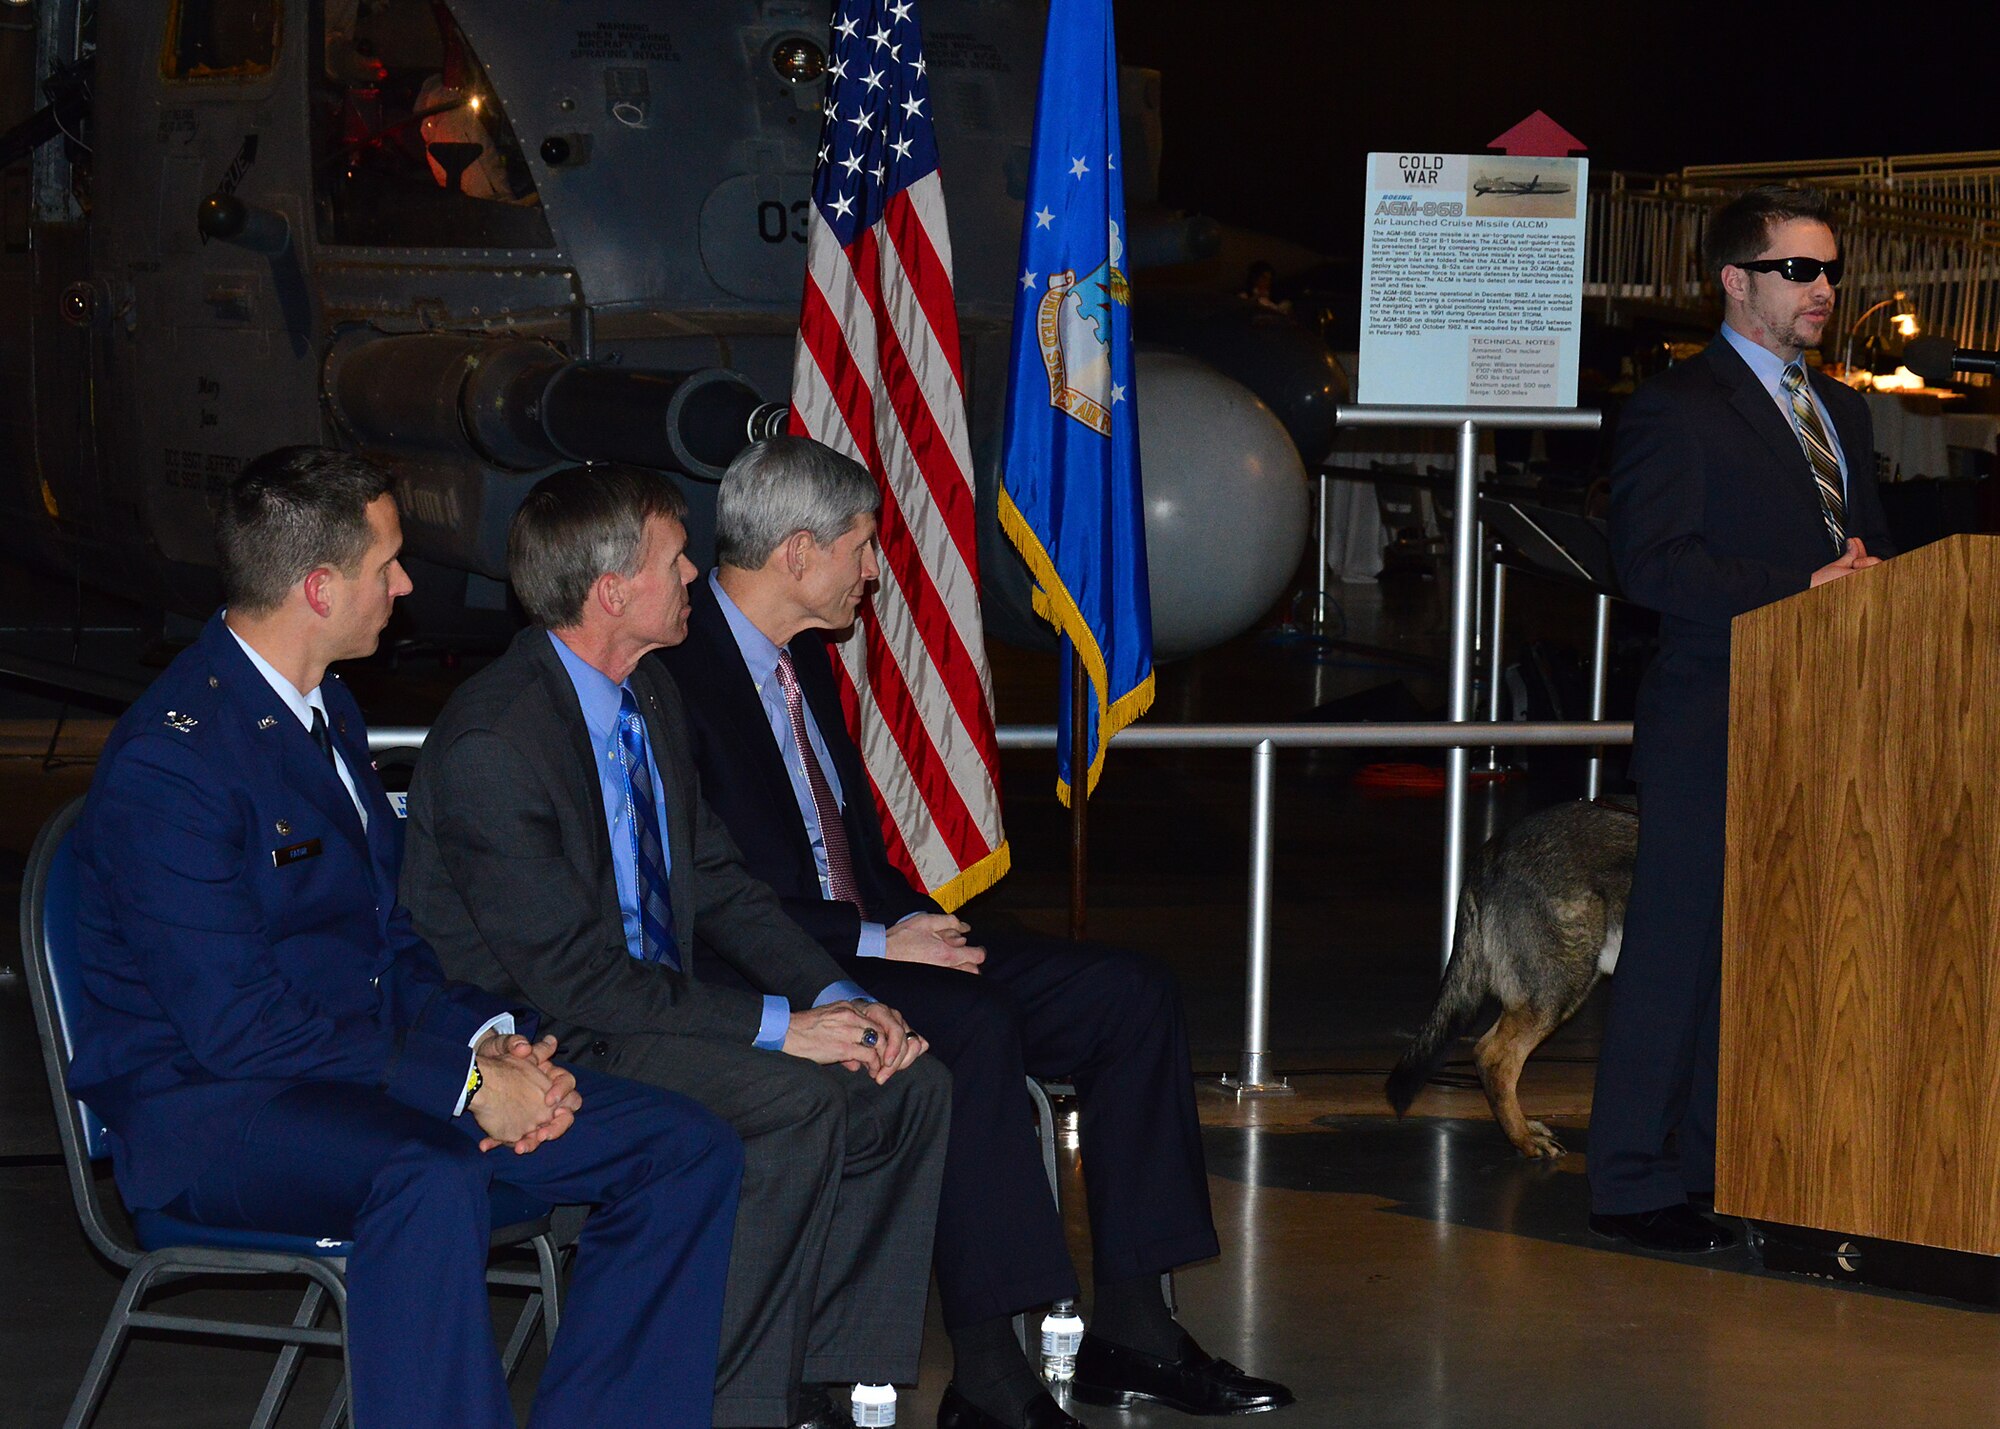 DAYTON, Ohio -- SSgt.(Ret.) Mike Malarsie speaks at the "Duty First, Always Ready" exhibit opening on Jan. 23, 2015 in the Cold War Gallery at the National Museum of the U.S. Air Force. Pictured from left to right are Former Commander 10th Air Support Operations Squadron Col. Roy Fatur, National Museum of the U.S. Air Force Director Lt. Gen.(Ret.) Jack Hudson, Former Chief of Staff Gen.(Ret.) Norton Schwartz, and SSgt.(Ret.) Mike Malarsie. (U.S. Air Force photo)